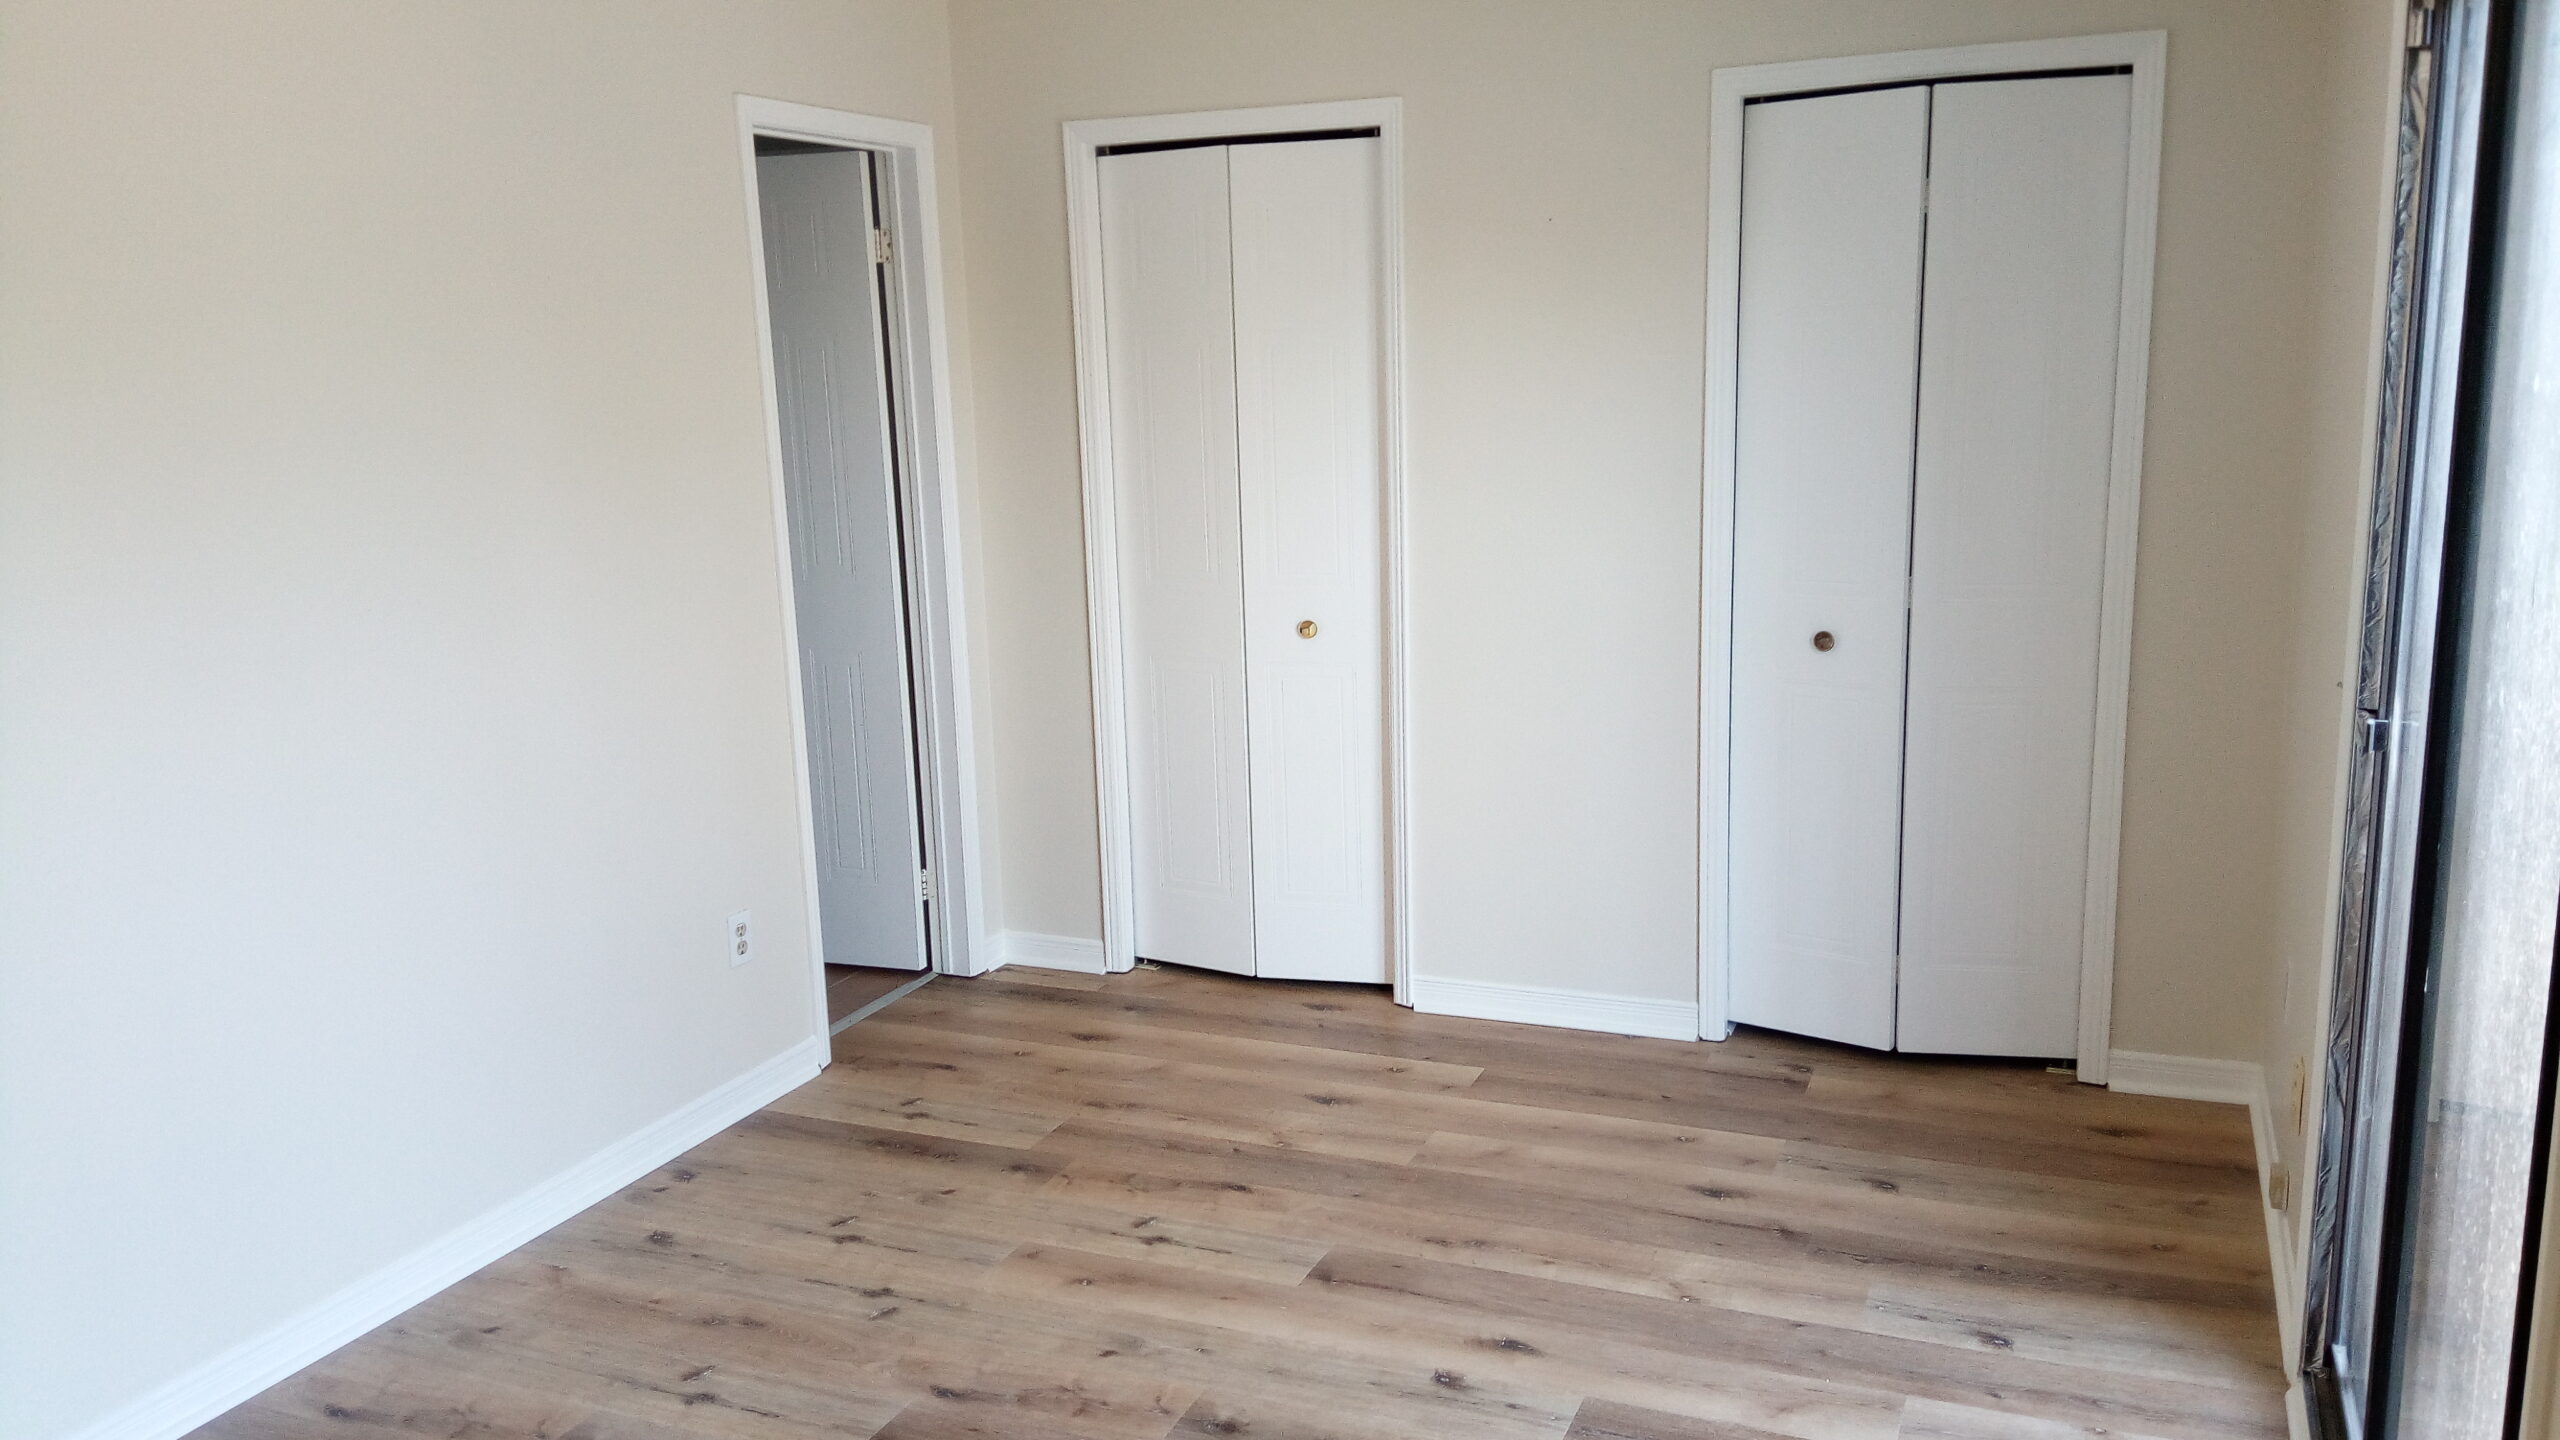 The bedroom sports smoky laminate floors and dual closets.Studio bedroom with dark laminate floors and two closets.